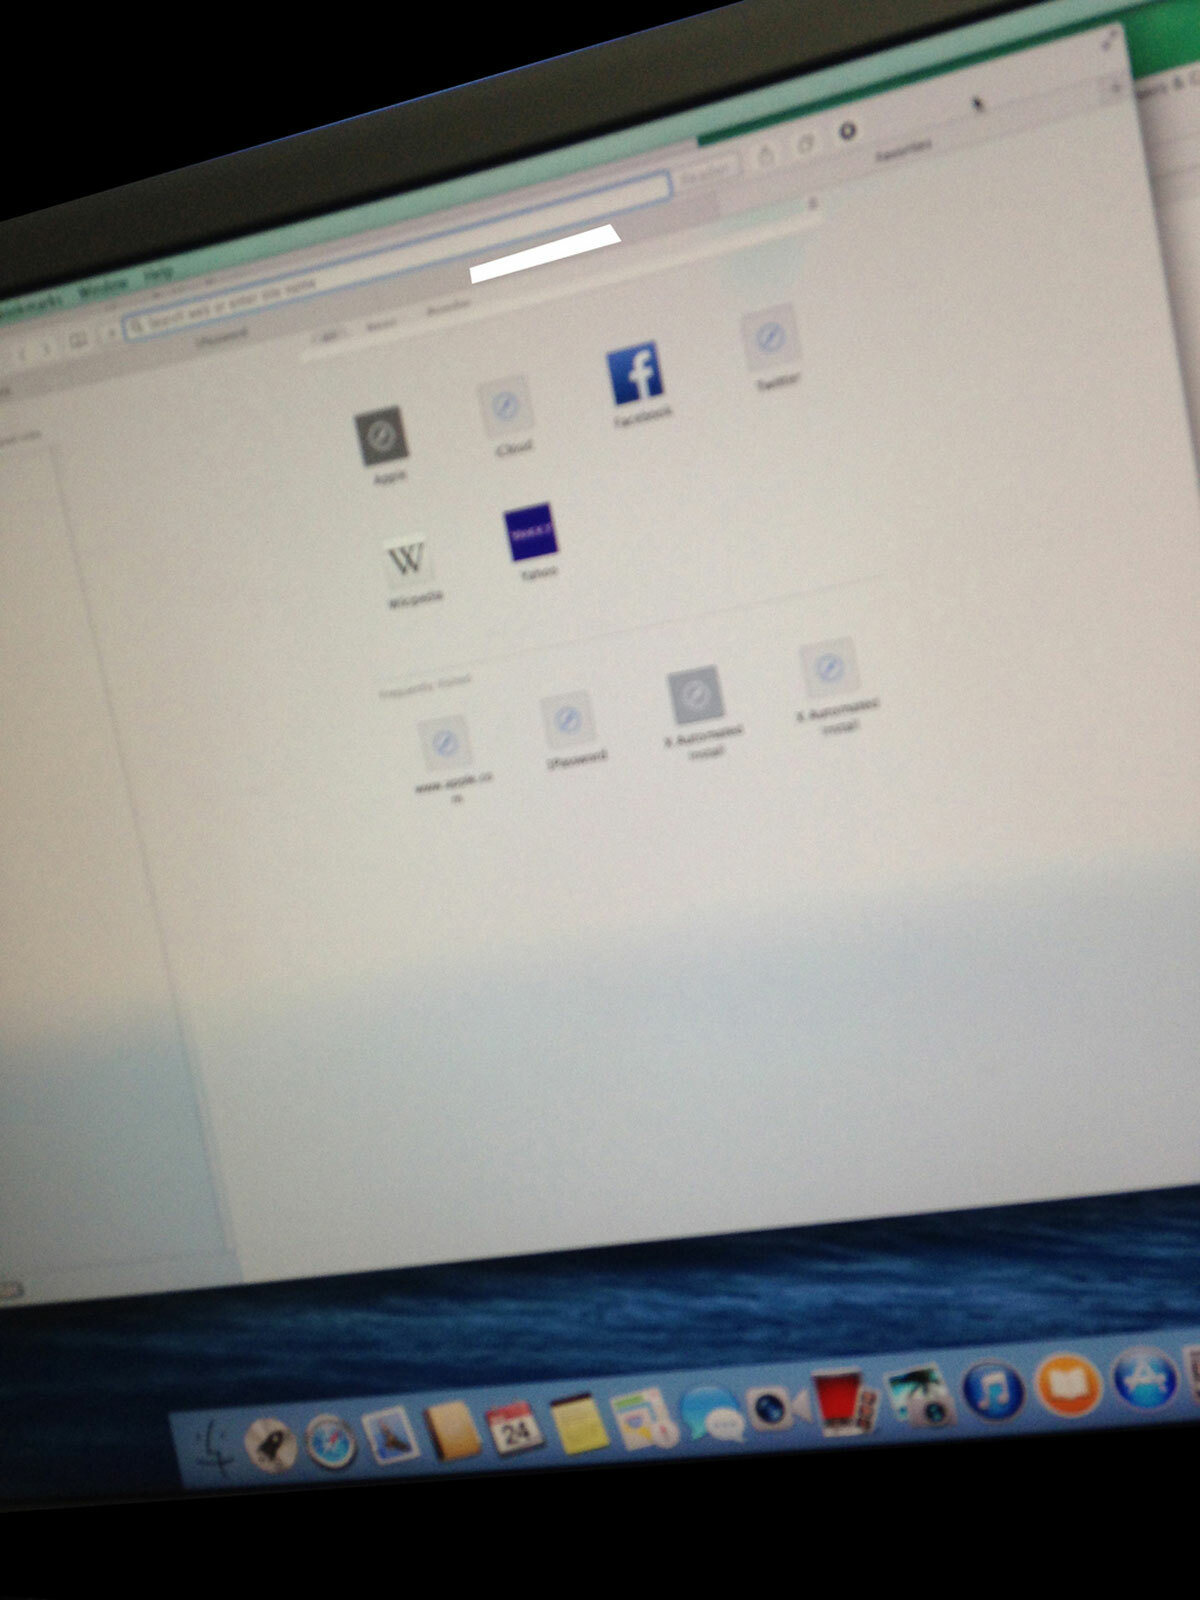 Alleged leaked image of OS X 10.10